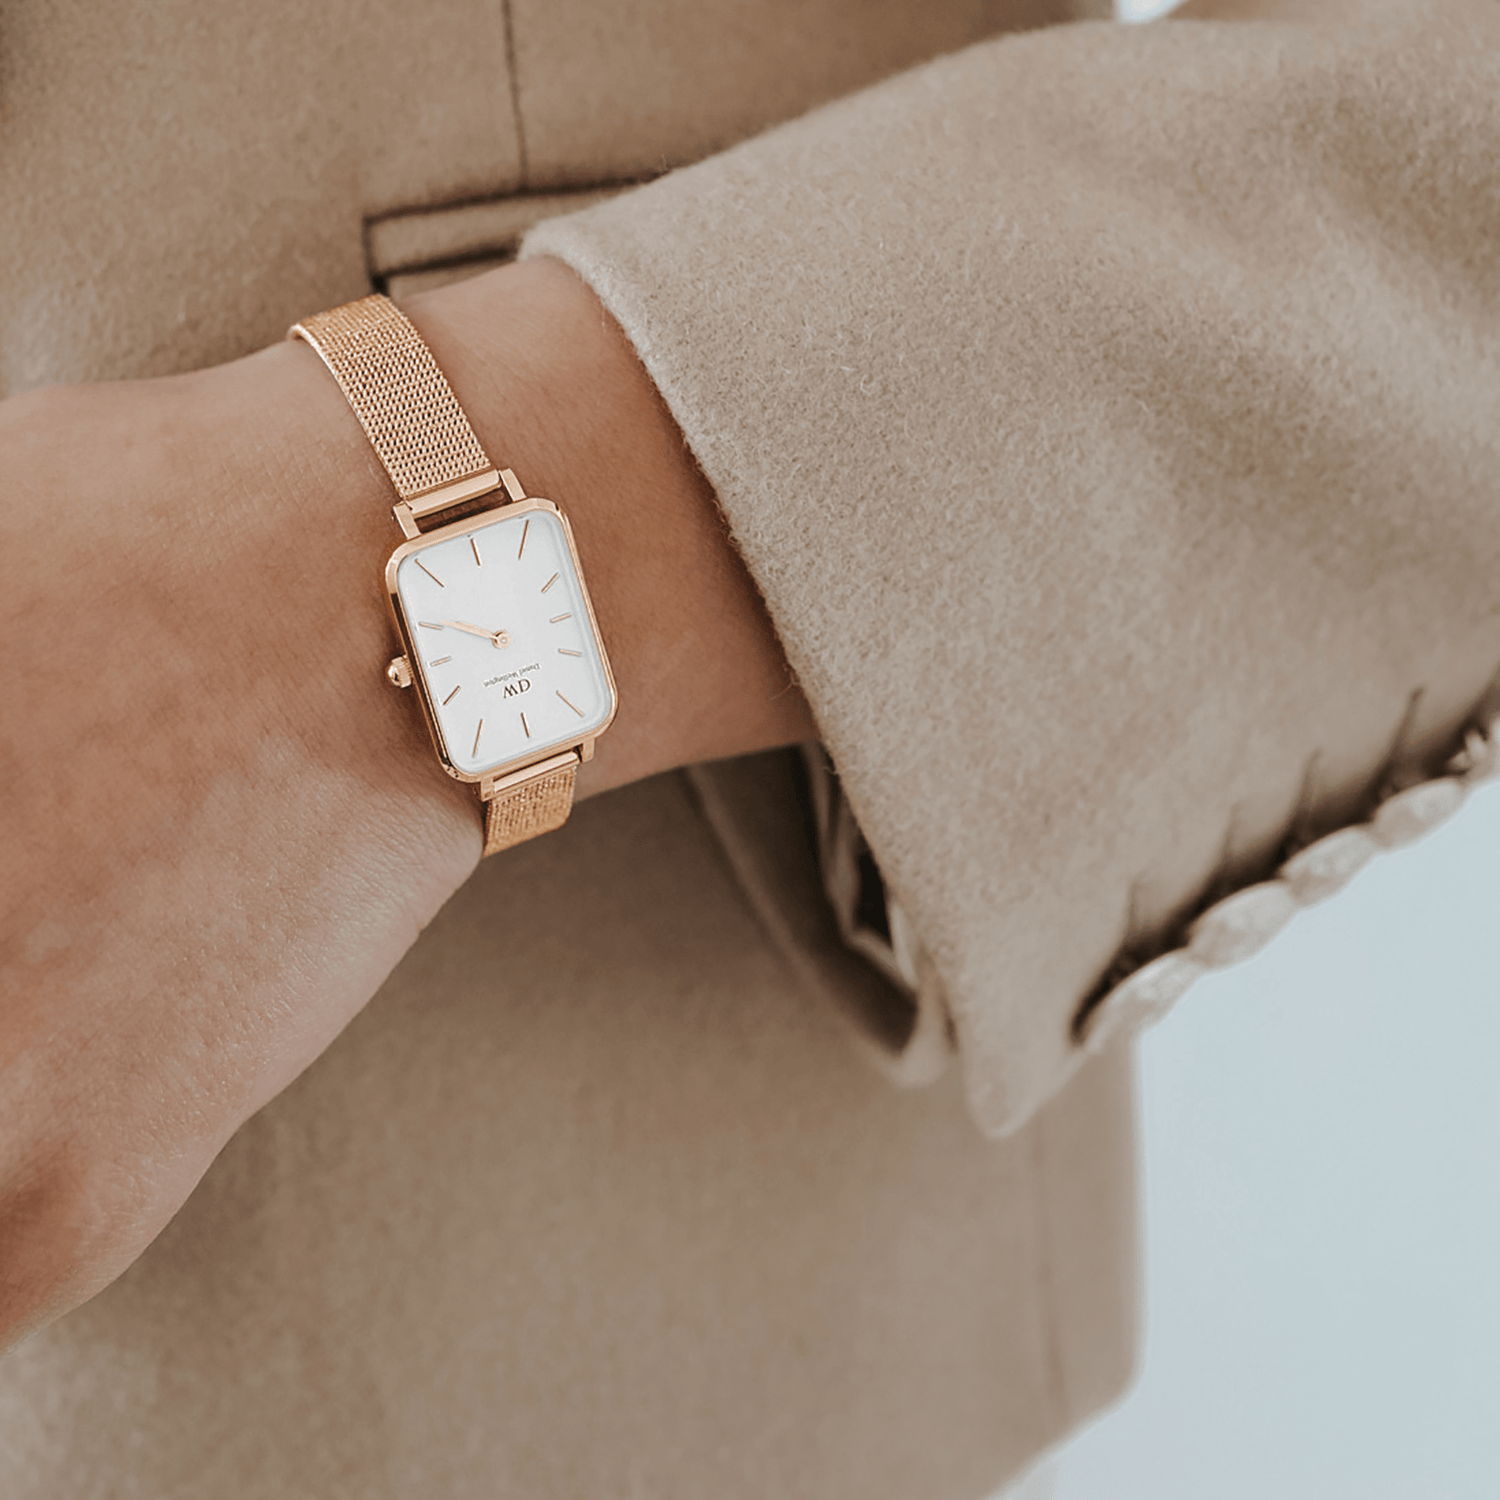 Quadro - Square watch in rose gold for women | DW